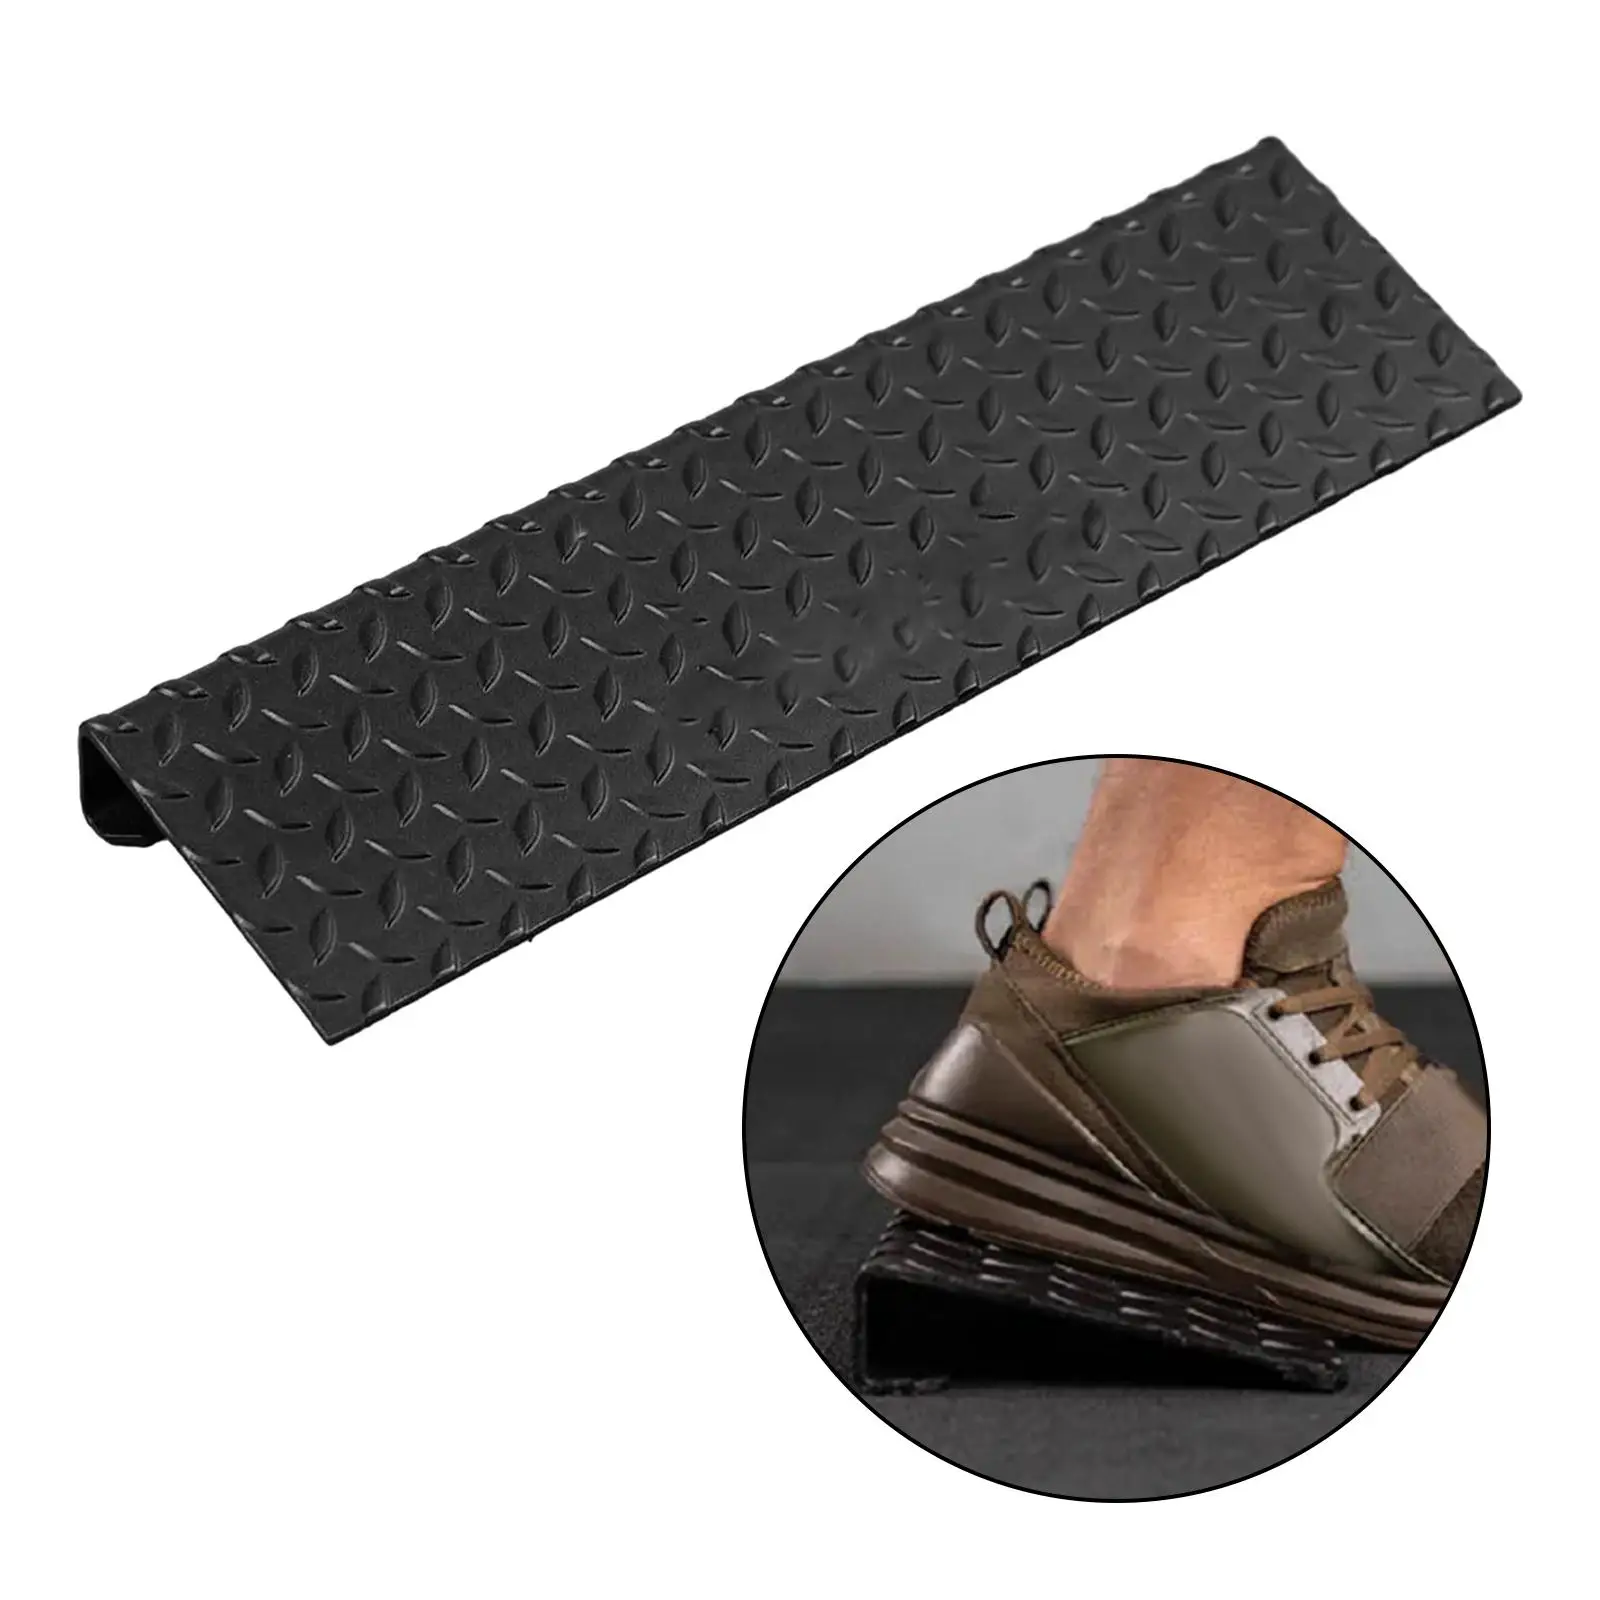 Slant Board Calf Stretcher Ankle Joint Correction Leg Stretch for Stretching Tight Calves Metal Calf Stretch Board Squat Wedge